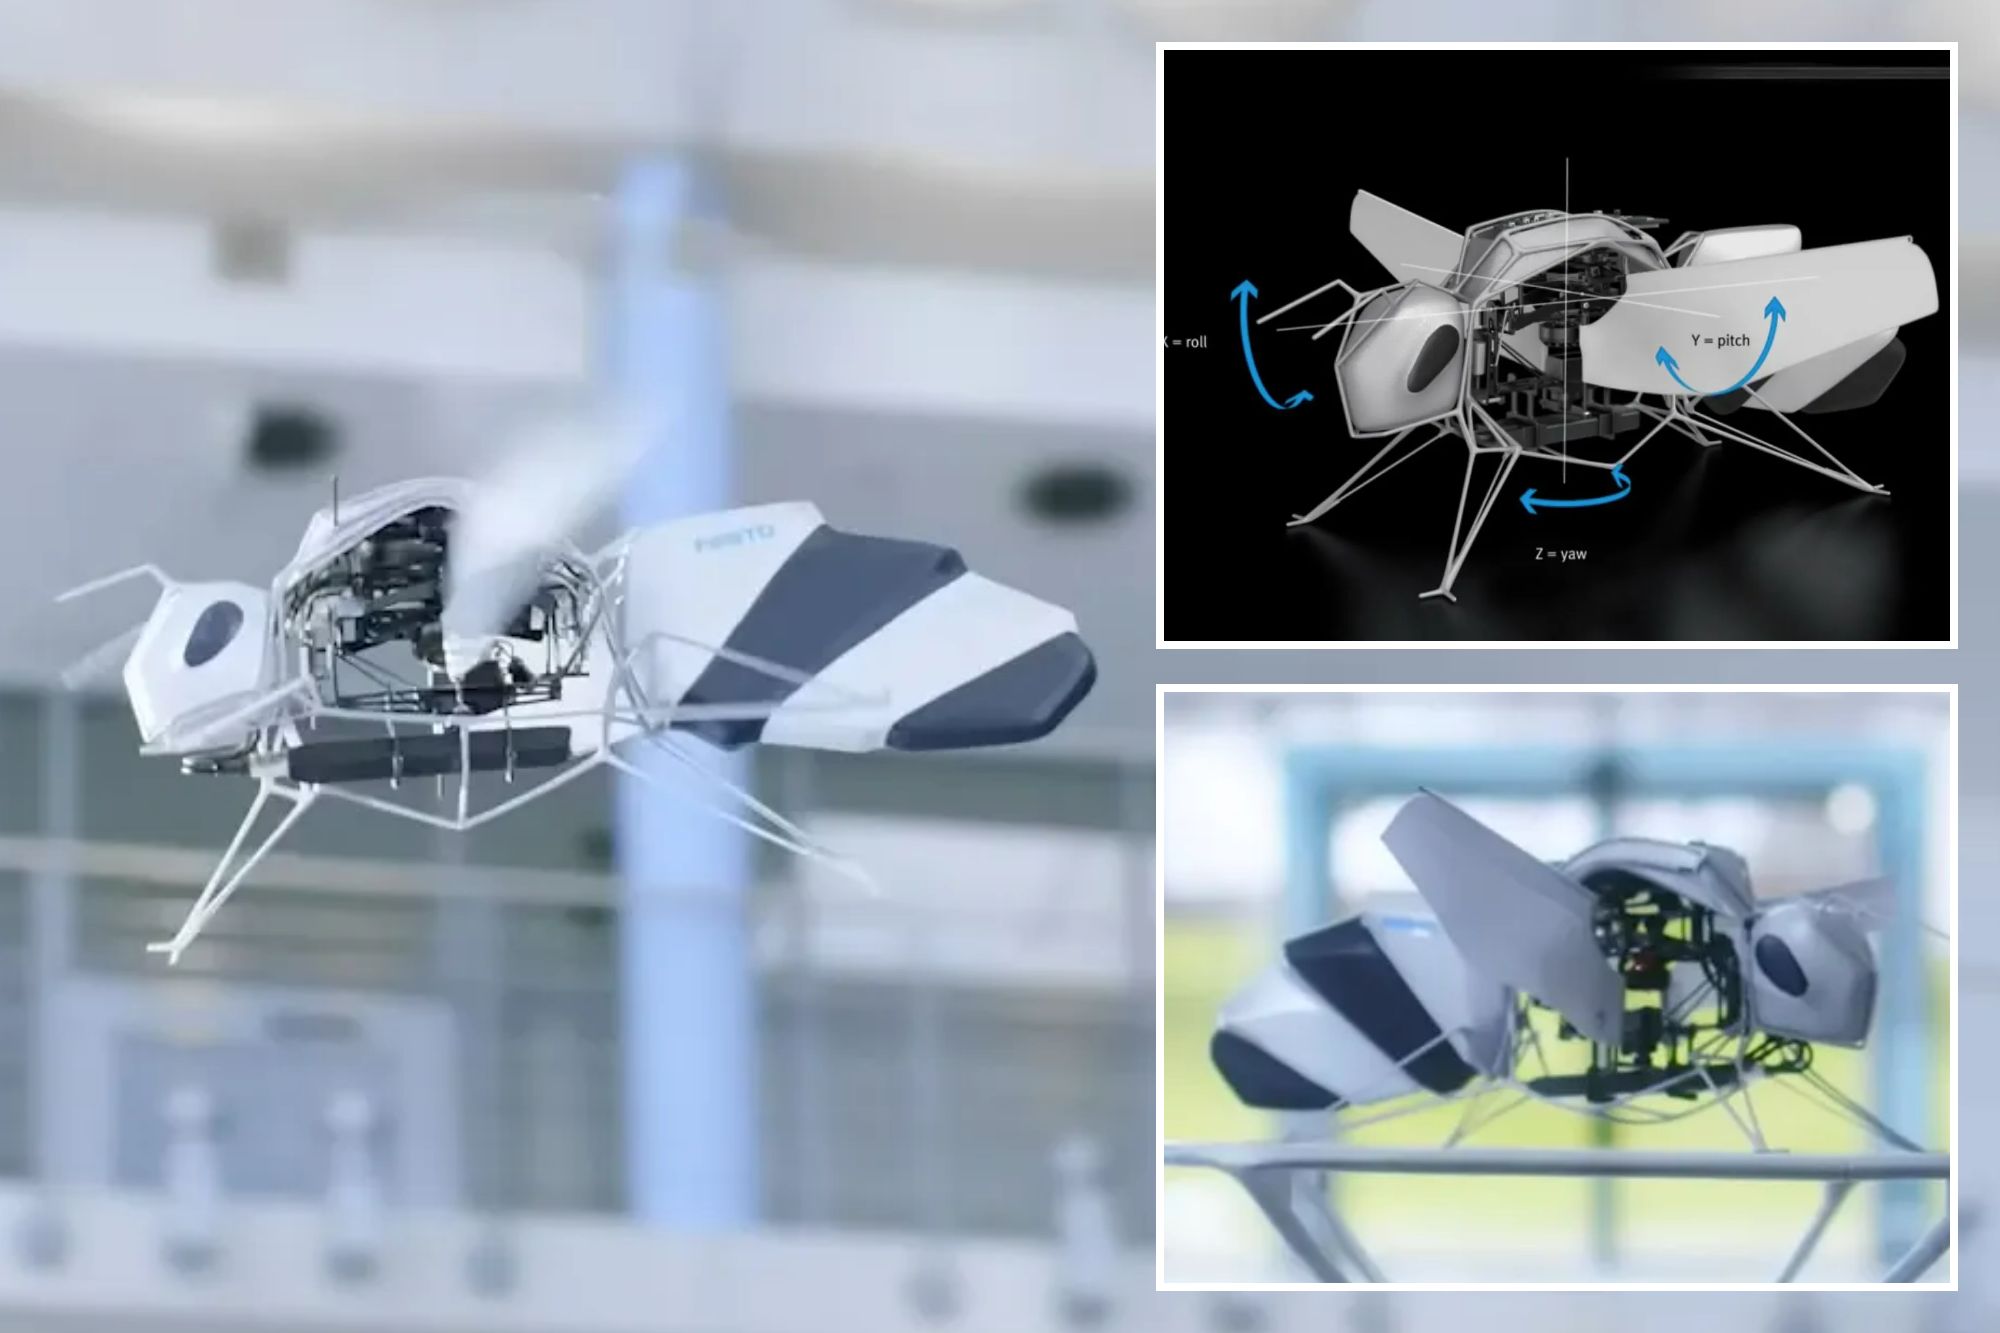 Scientists unveil giant robot bees that can fly and SWARM in groups autonomously